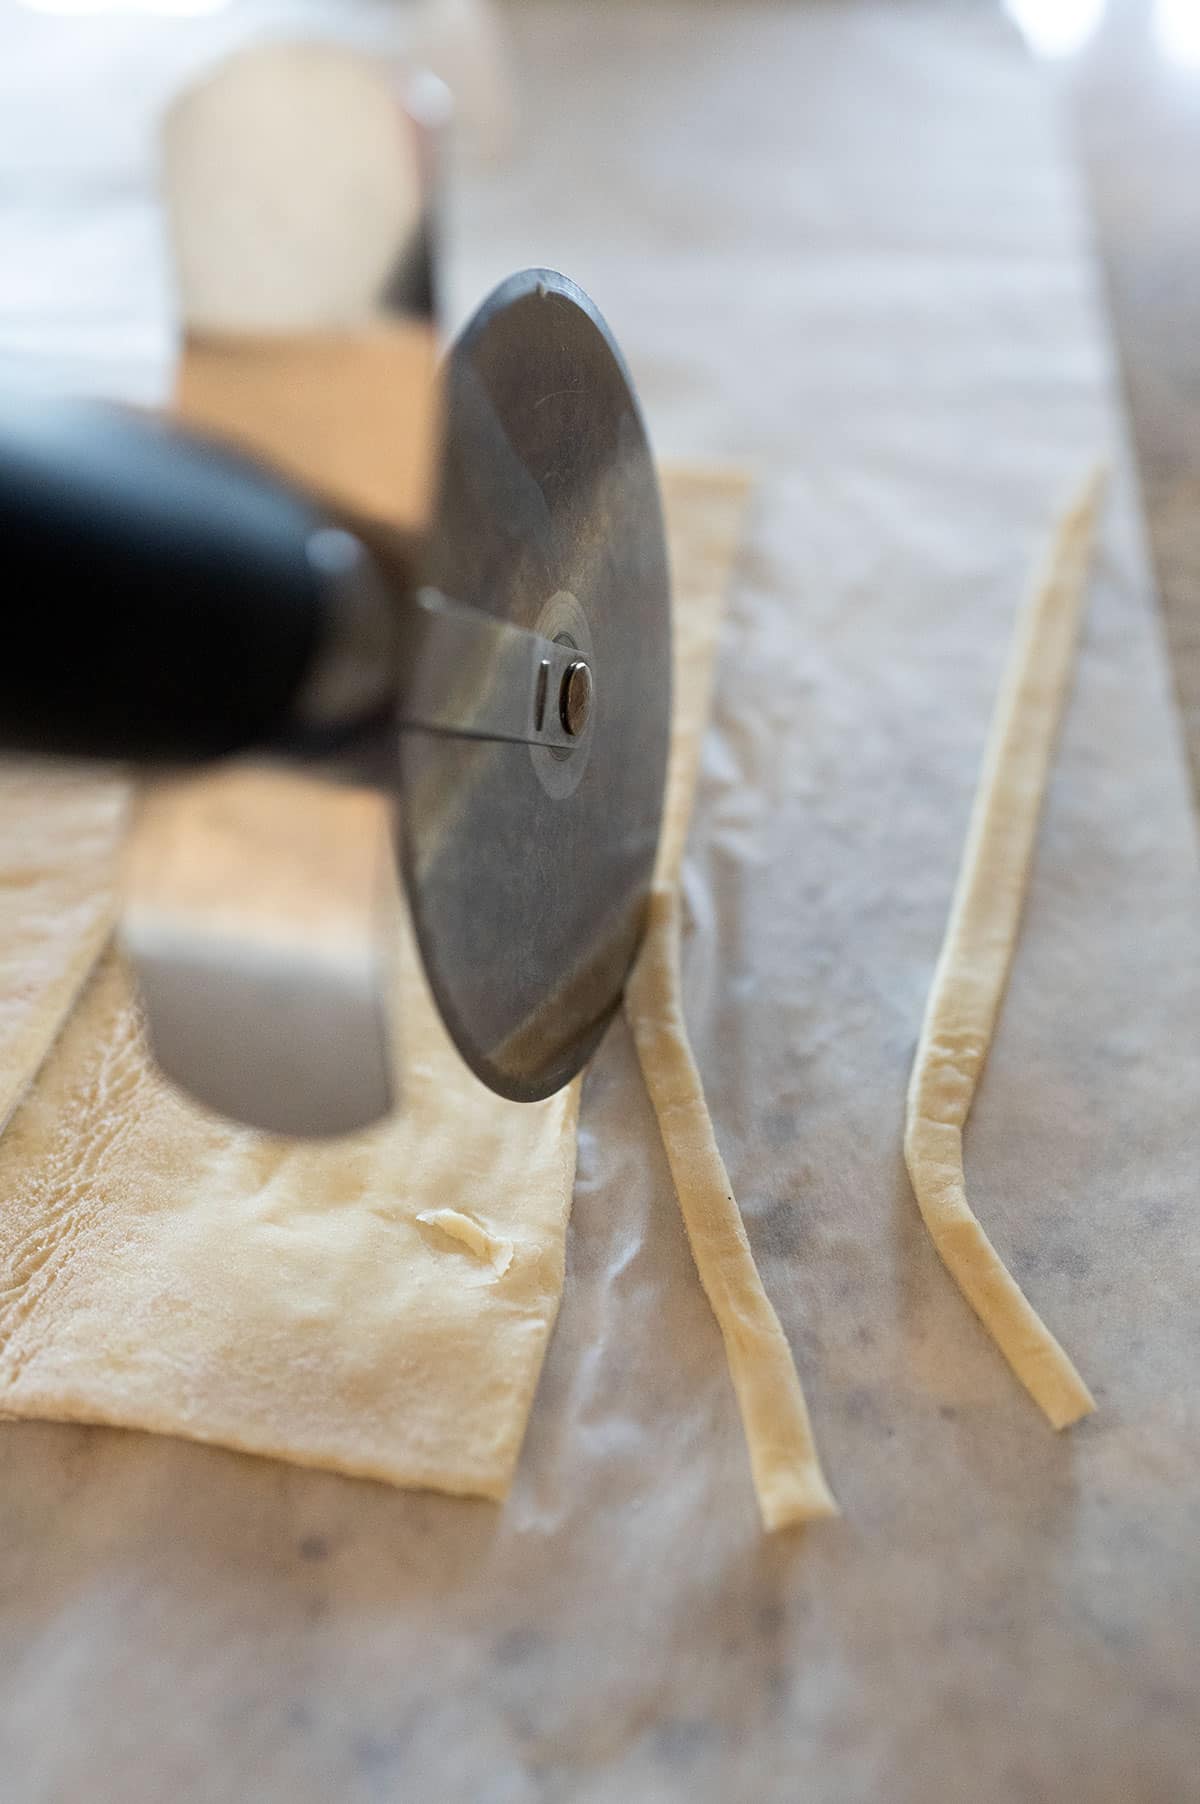 Cutting thin strips of puff pastry with pizza cutter.